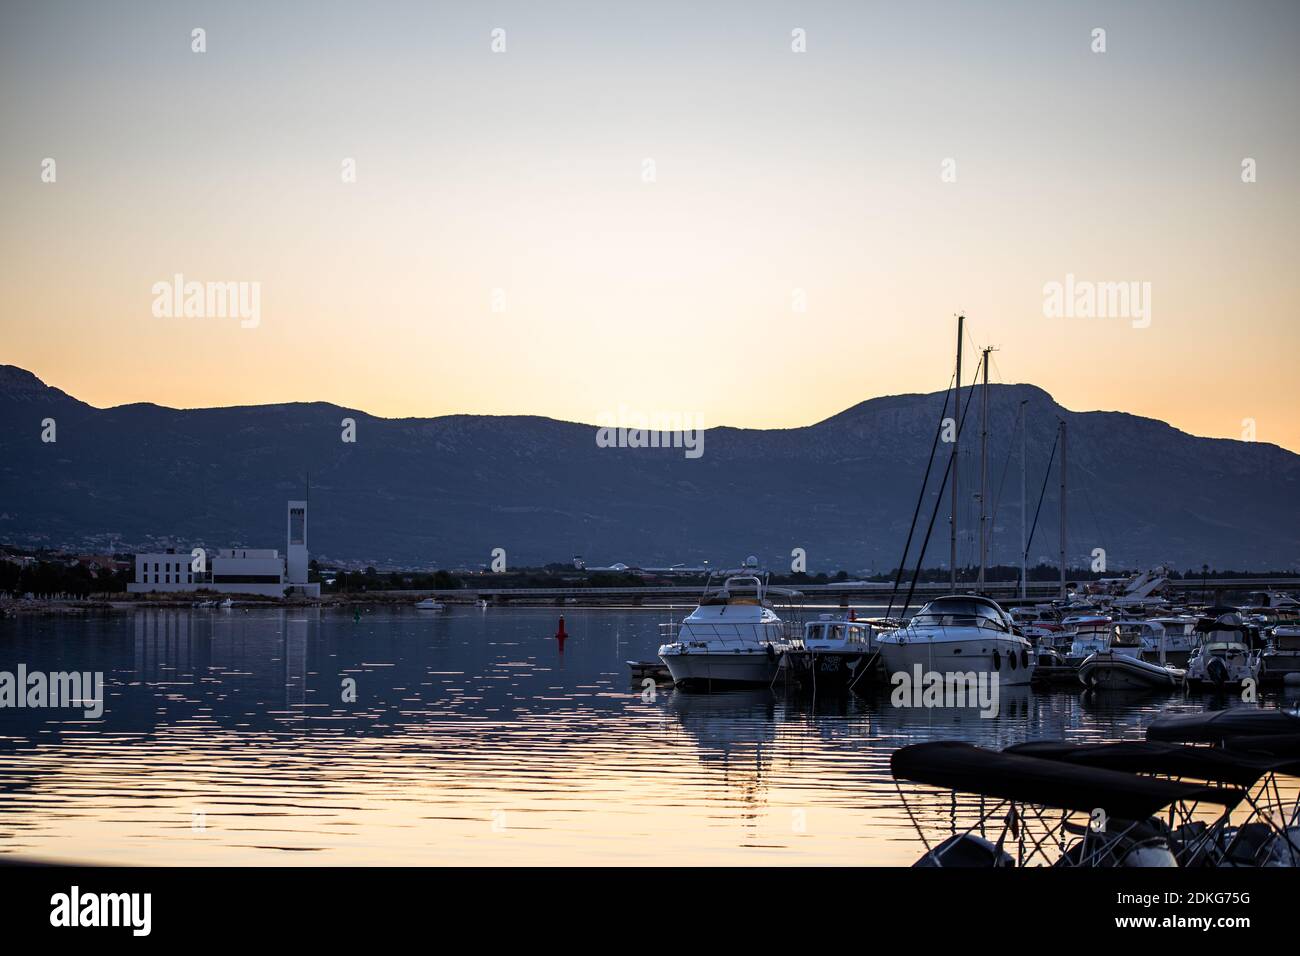 Sunrise over the water with boats in the foreground. In the background you can see the Veliki Kabal mountains. Stock Photo